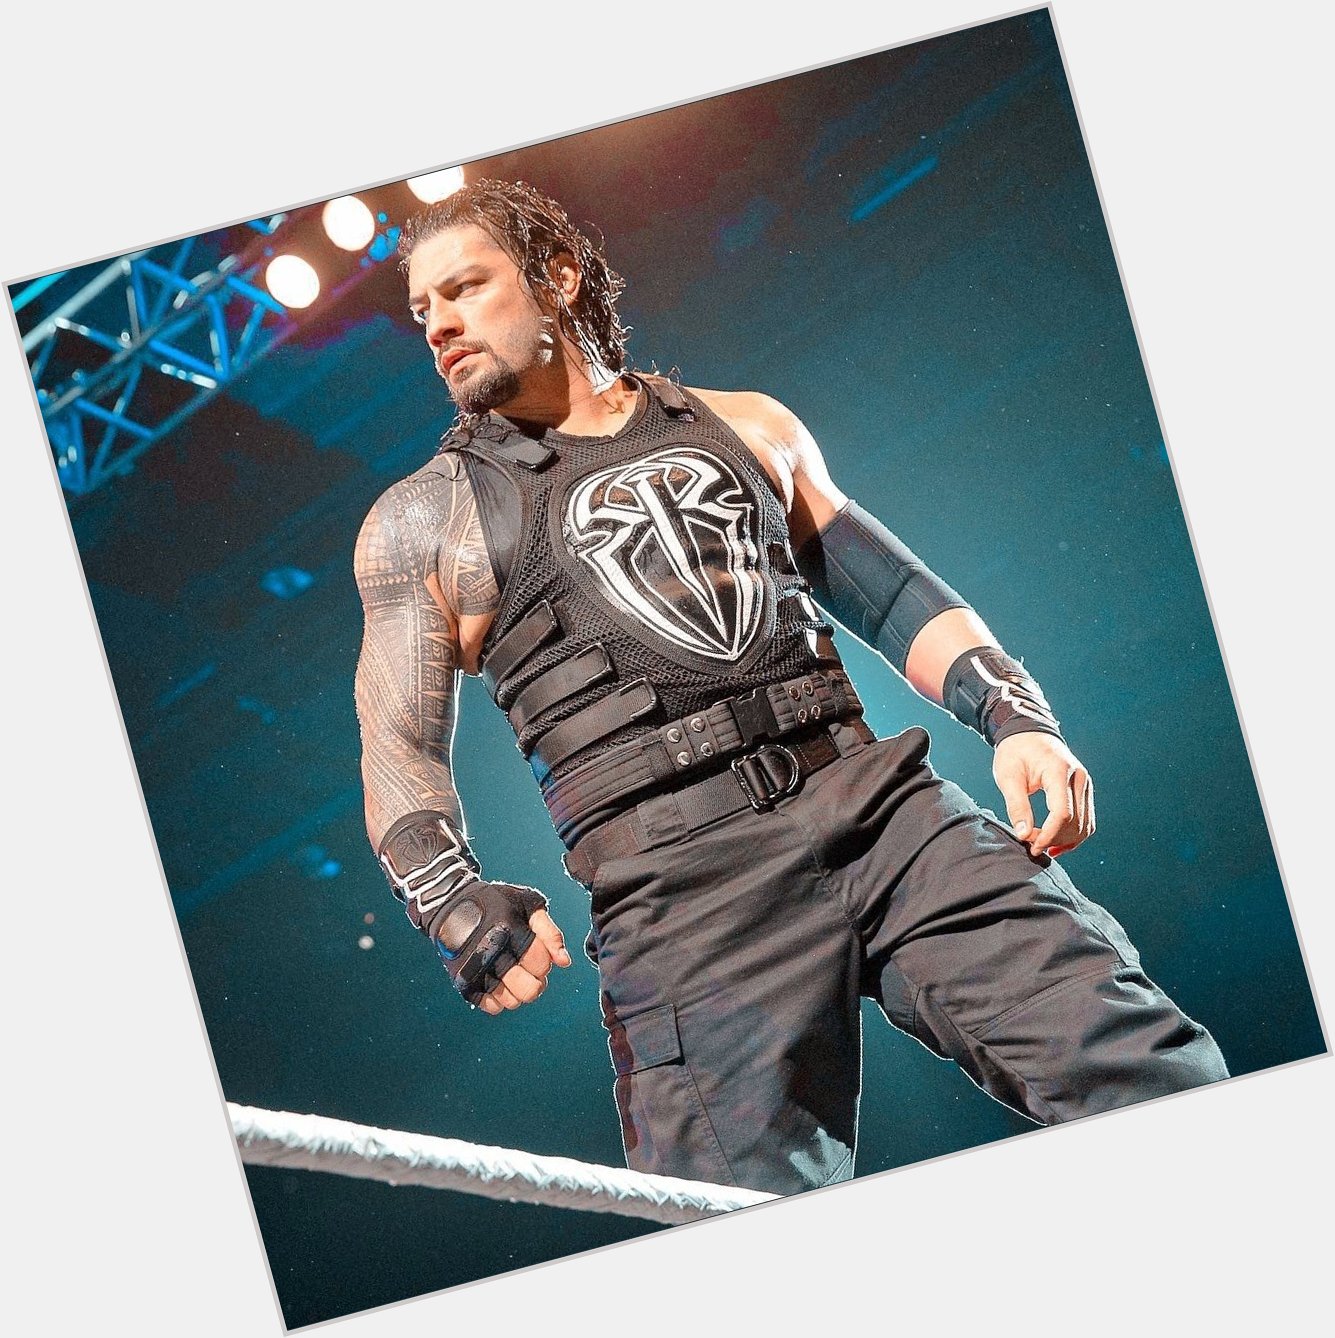 Happy birthday to \"The head of the Table\" Roman Reigns!  